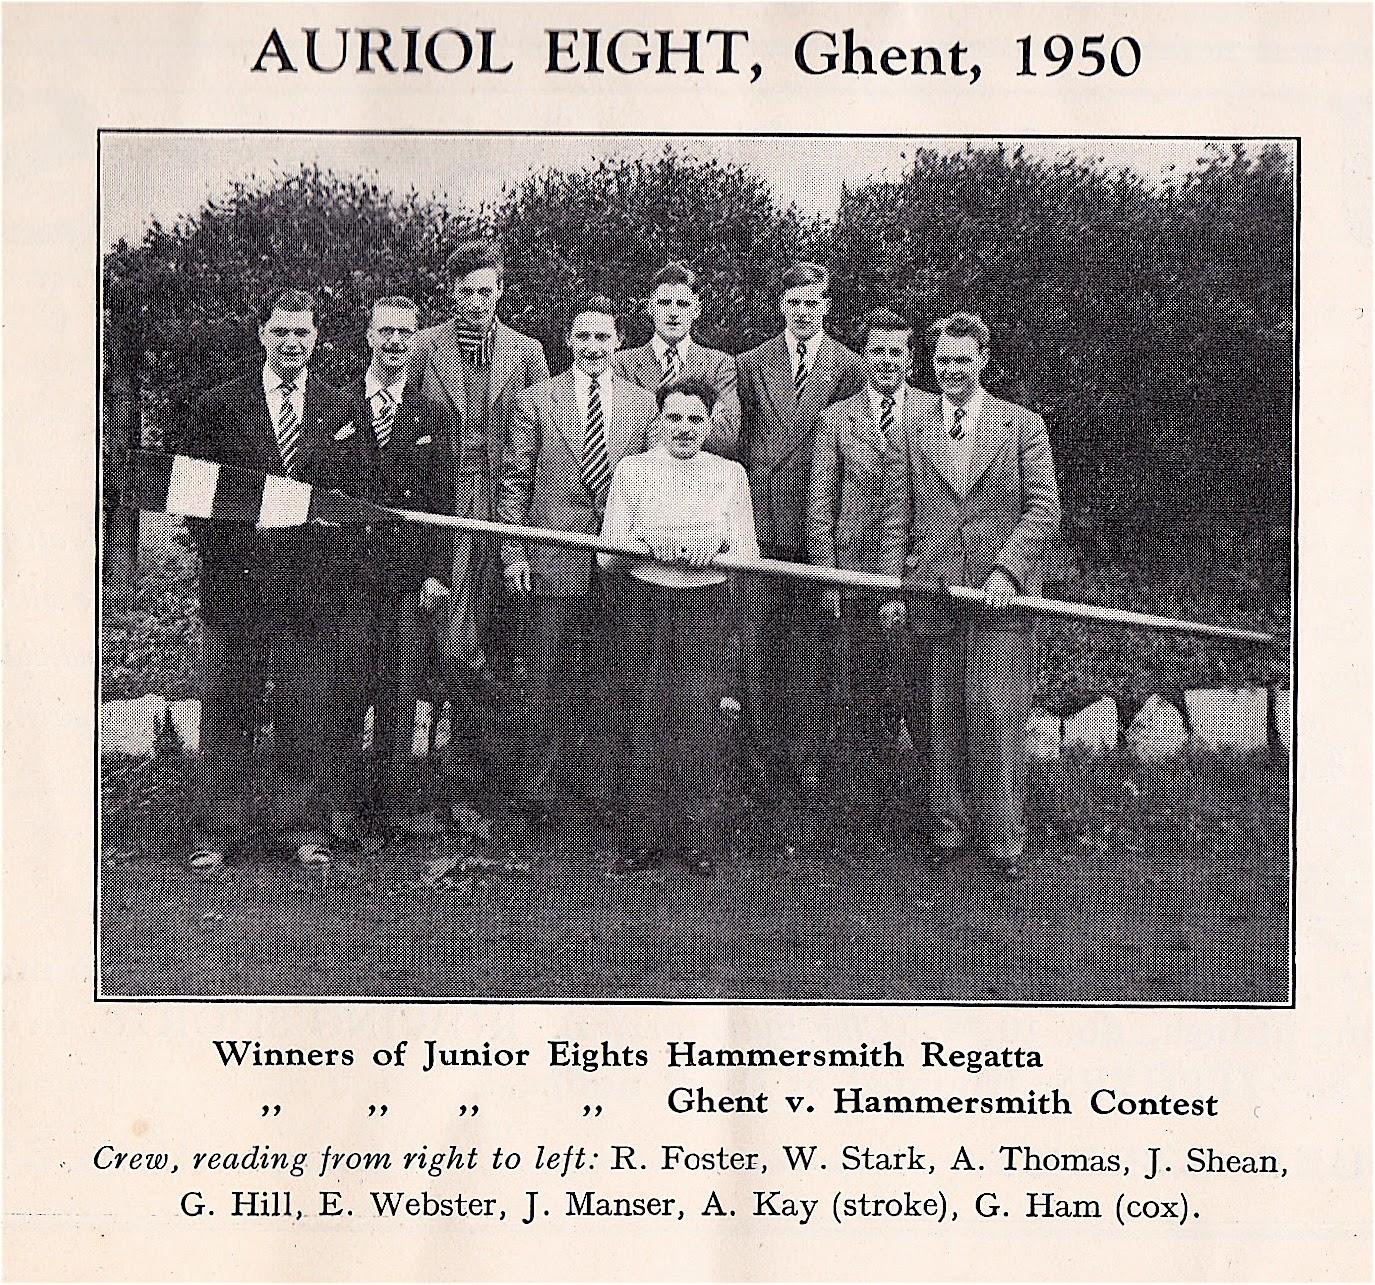 The ARC crew for Ghent pictured in Rowing Magazine n° 7, Spring 1950. It was Tony Kay, the stroke, that Hill boxed in the Auriol clubroom. History does not record what the dispute was about though I could imagine that Hill coveted the stroke seat.